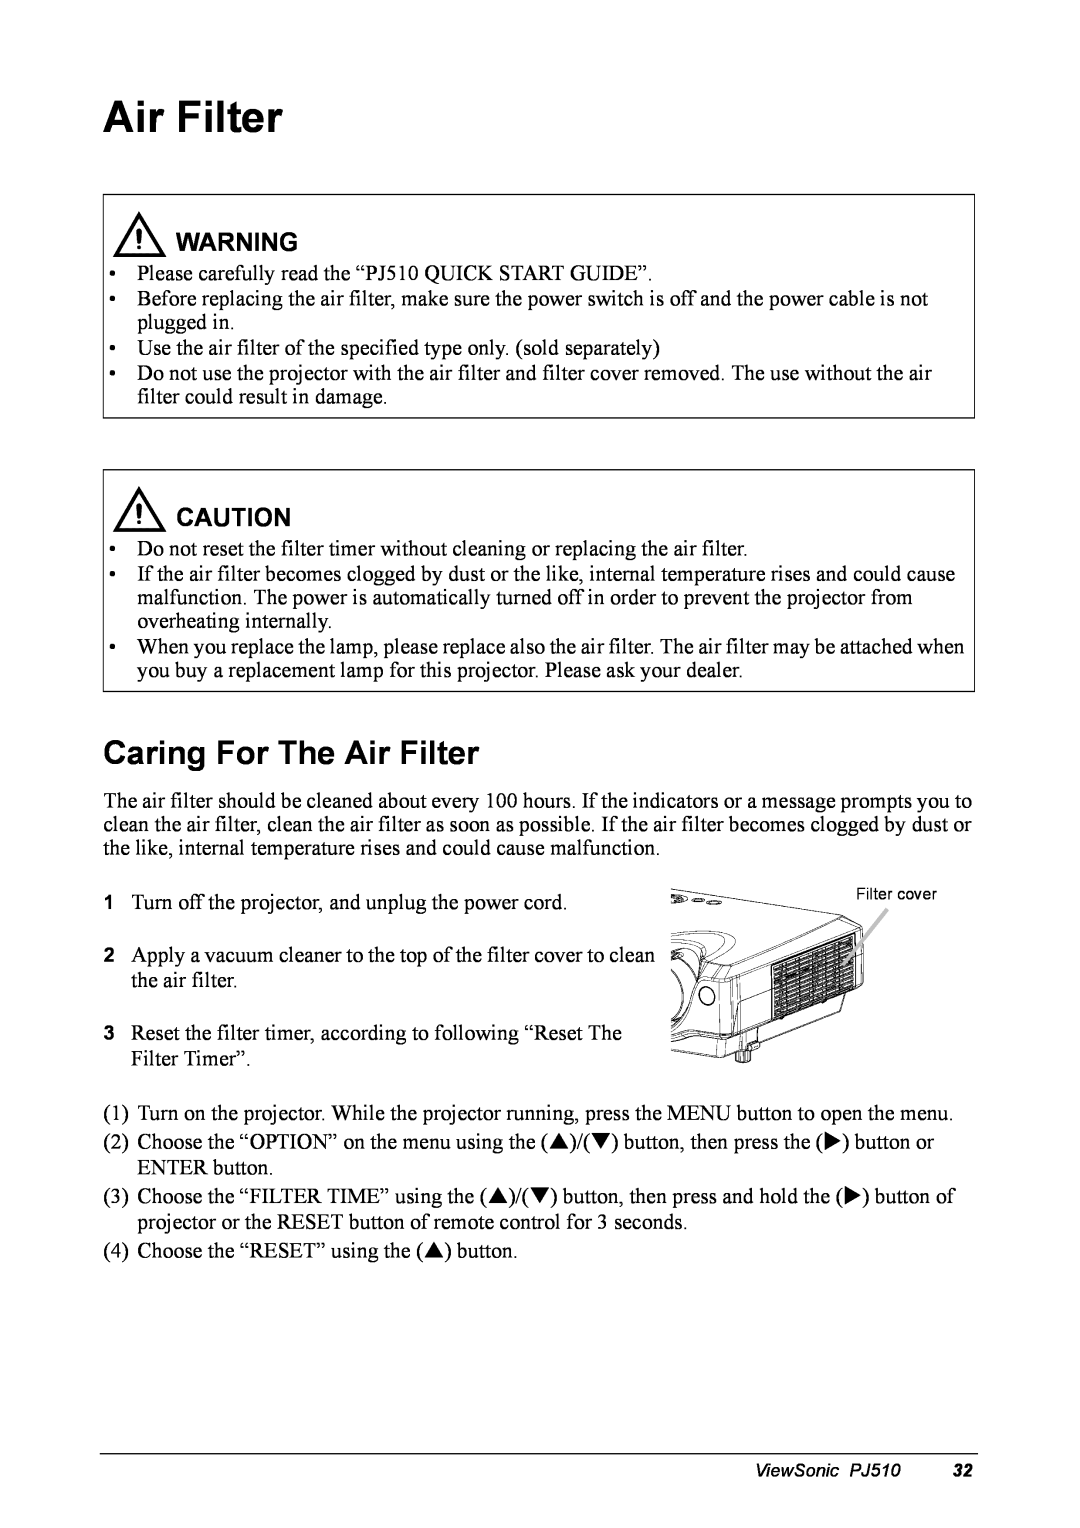 ViewSonic PJ510 manual Caring For The Air Filter 